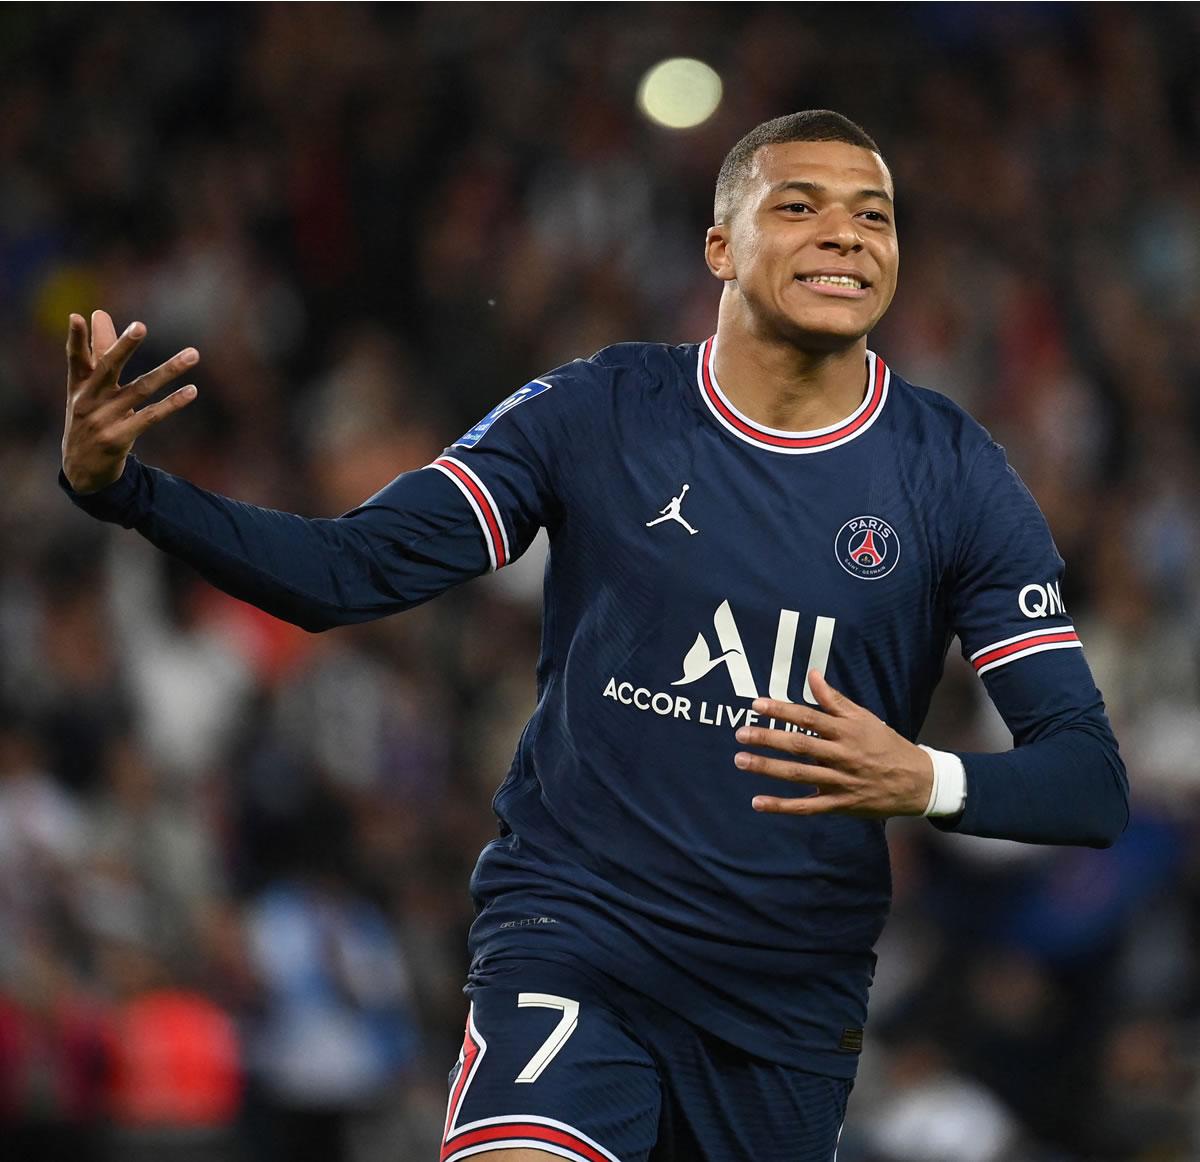 Mbappe reached 21 goals as the season's top scorer in Ligue 1.